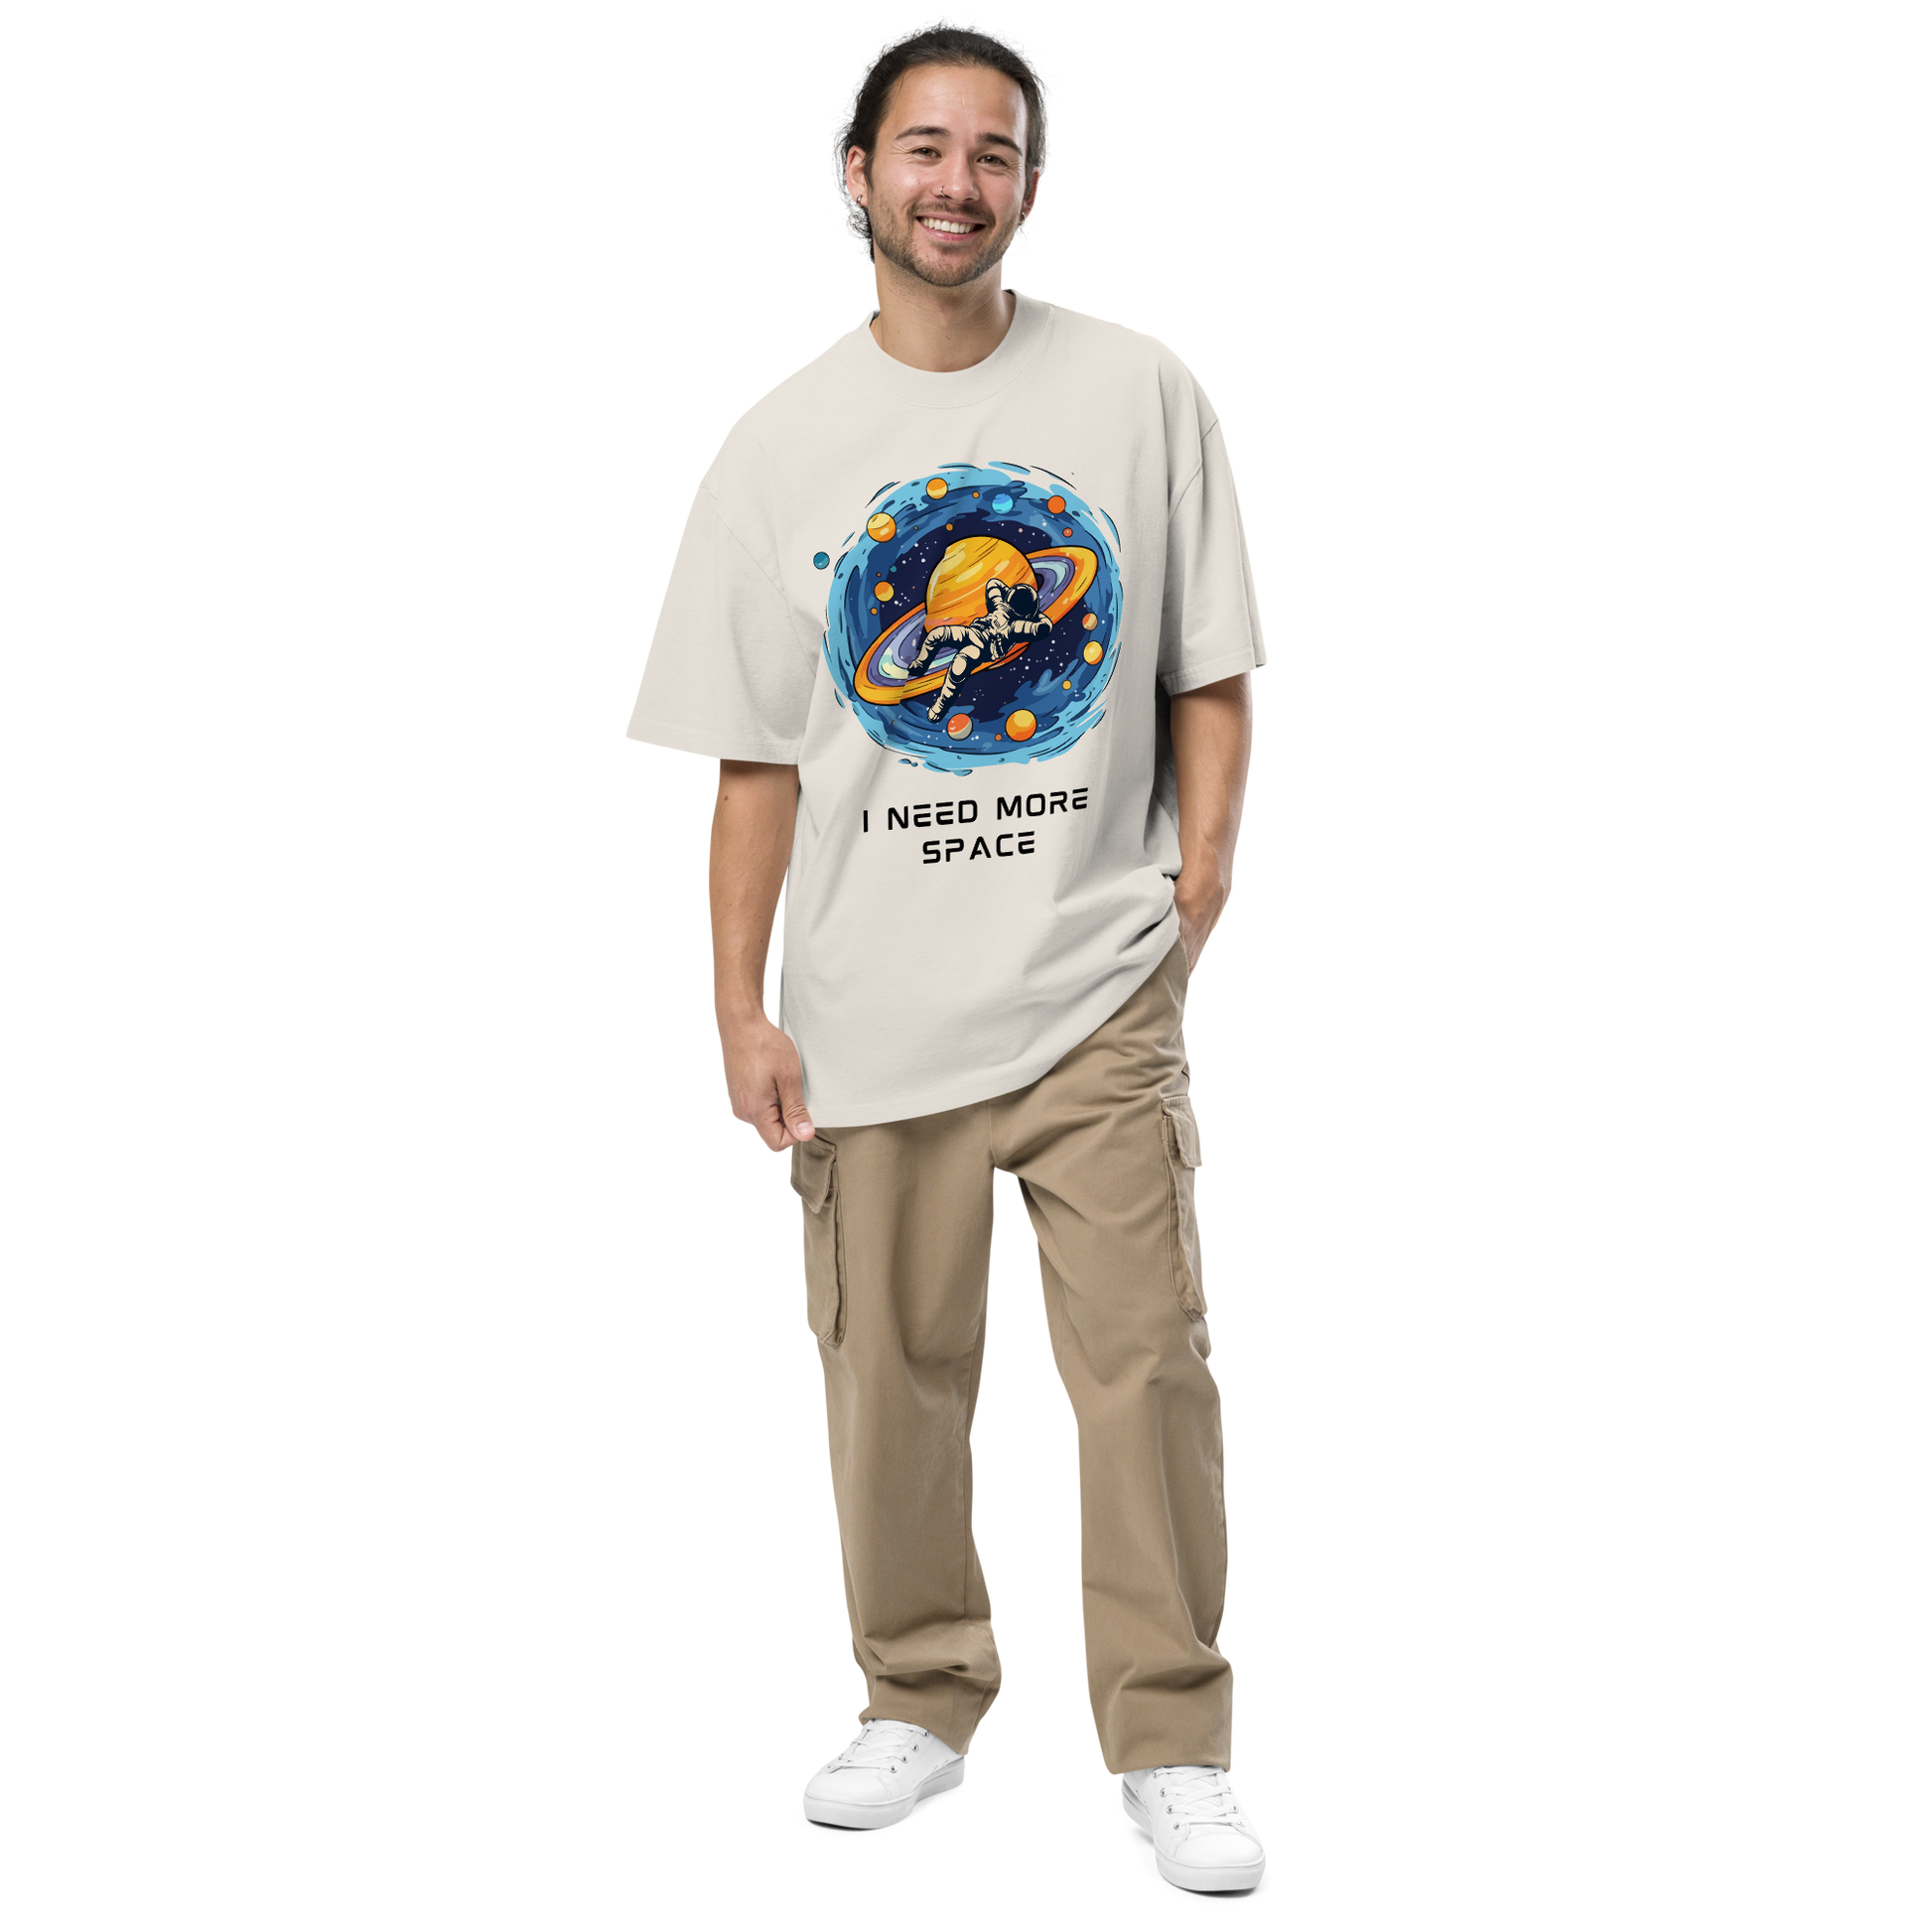 Smiling man wearing a Faded Bone Space Oversized T-Shirt featuring a captivating I Need More Space graphic on the chest - Funny Graphic Space Oversized Tees - Boozy Fox